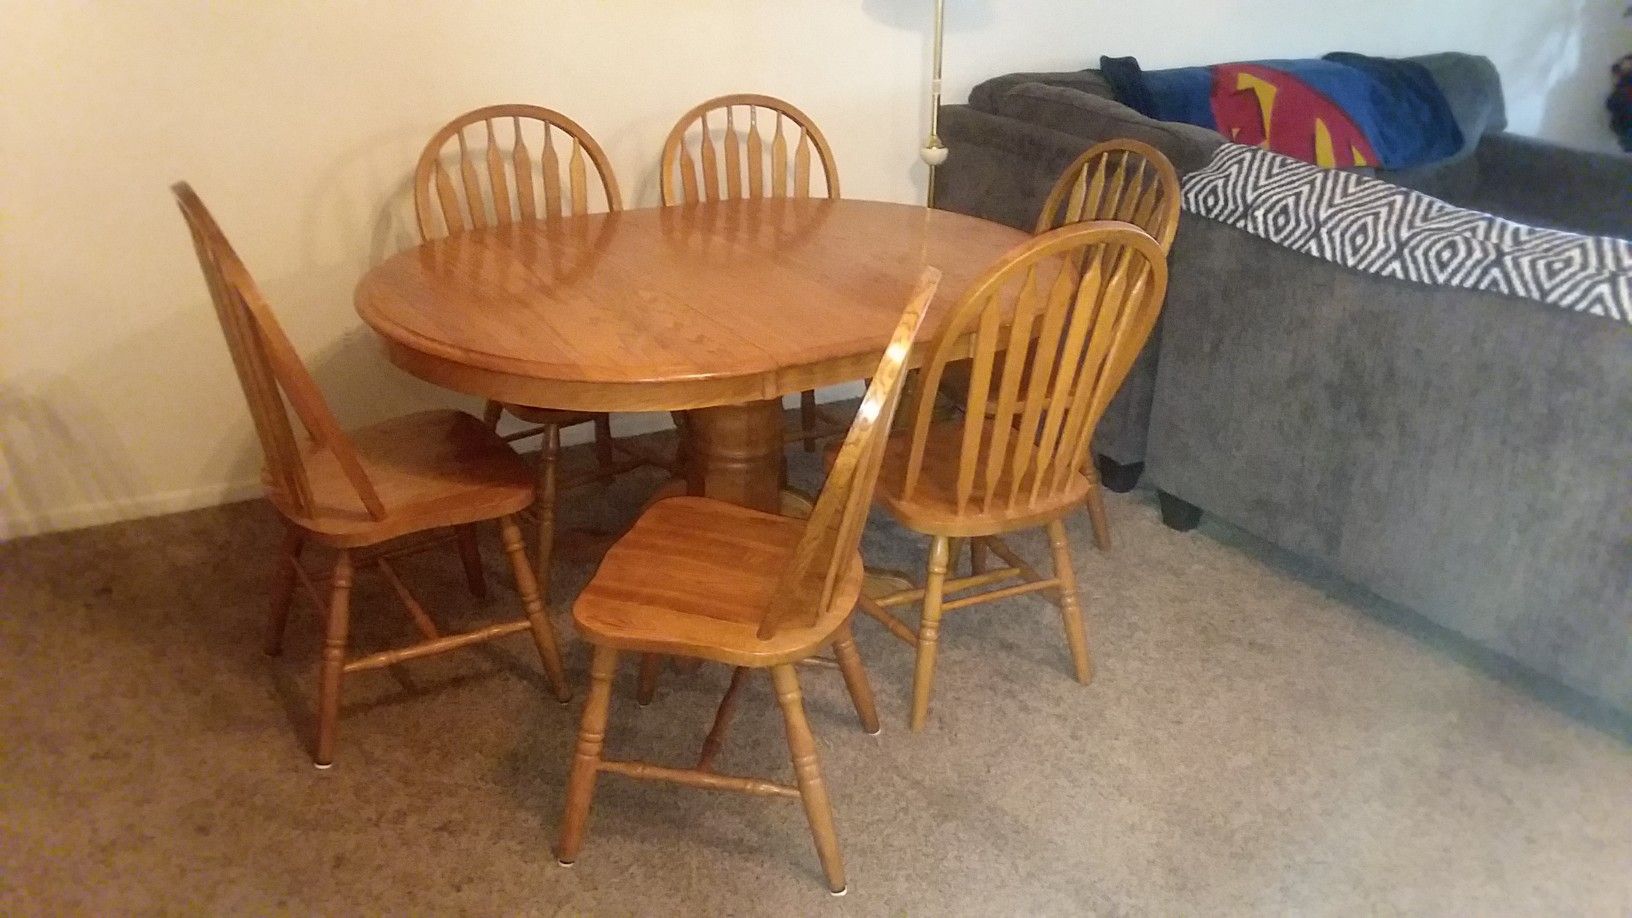 Dinning Table full set of 4 chairs.